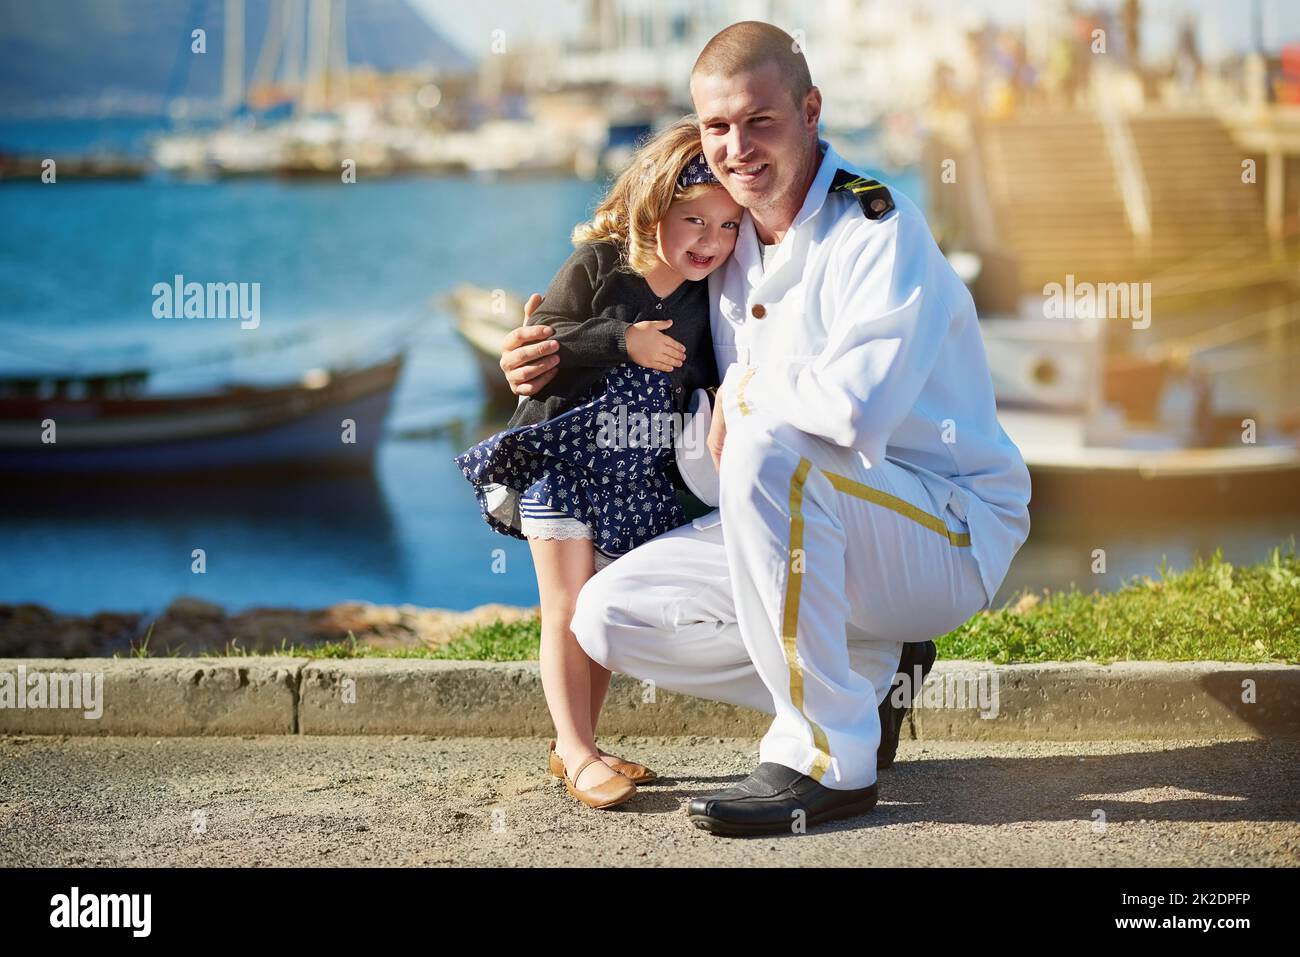 Dad and his darling. Portrait of a father in a navy uniform posing with his little girl on the dock. Stock Photo